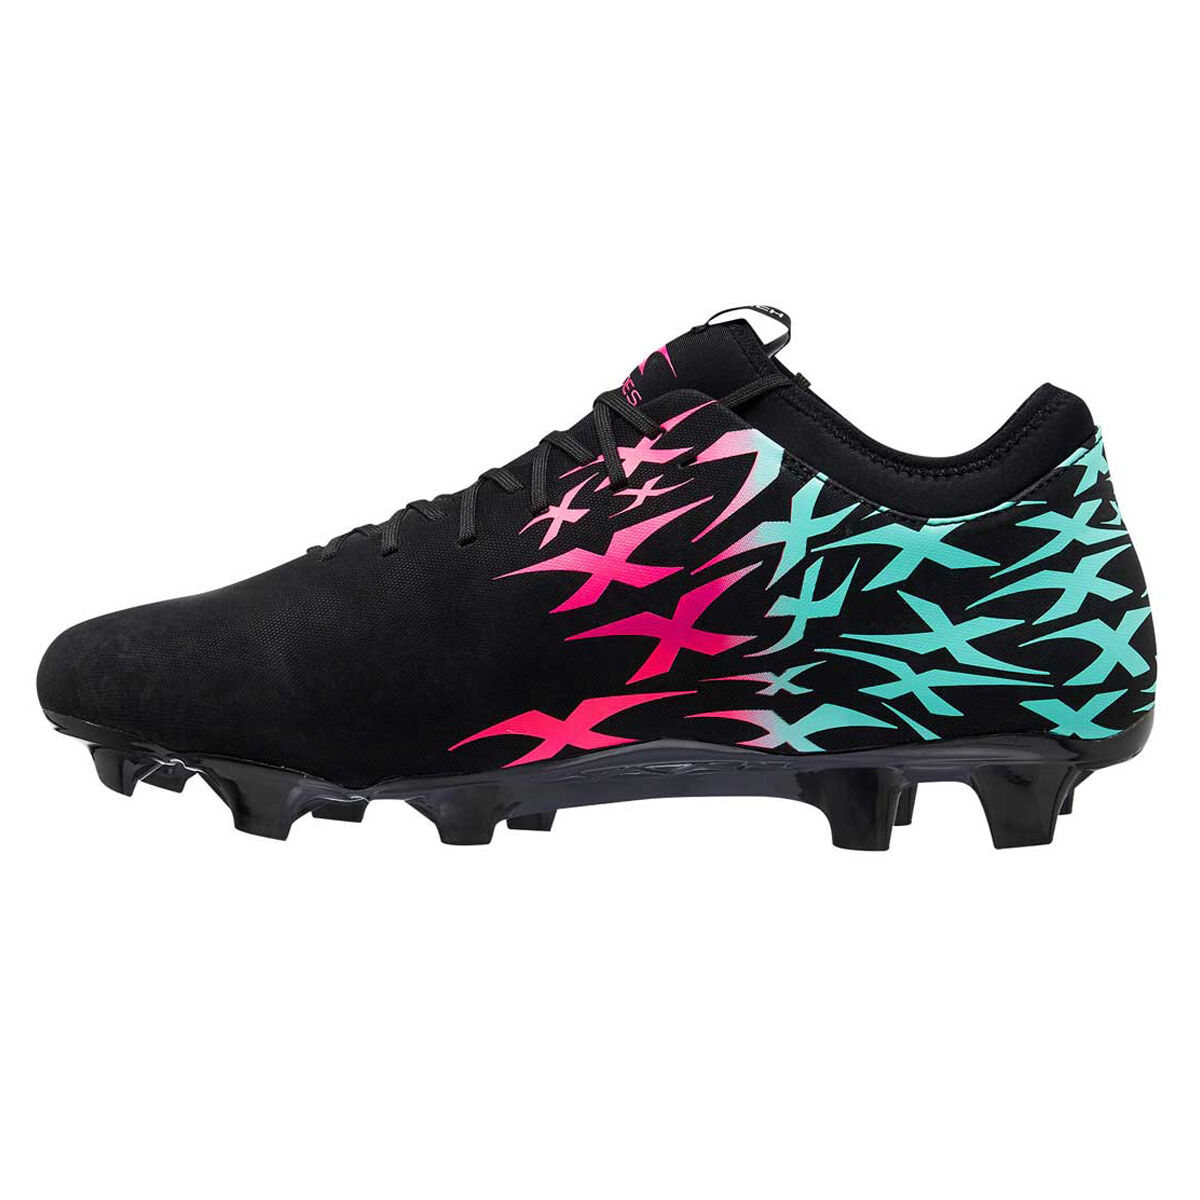 touch football shoes rebel